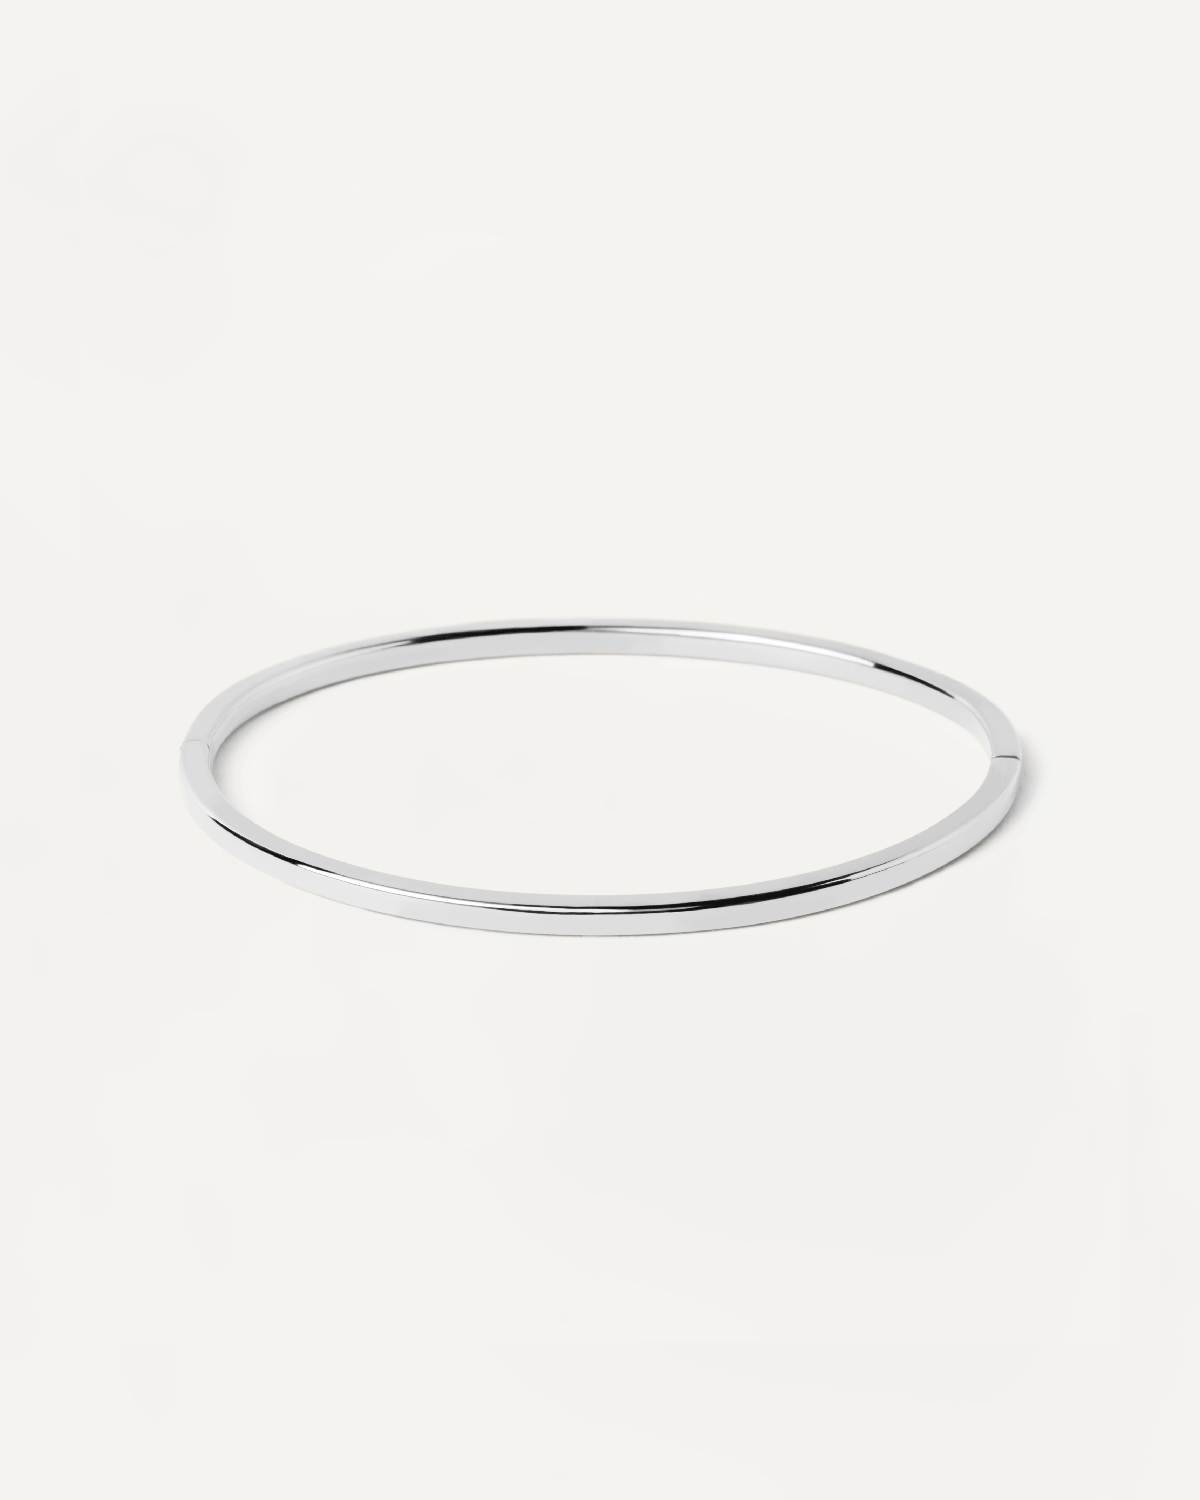 2023 Selection | White Gold Core Bangle. 18K solid white gold hinged rigid bracelet with basic plain design. Get the latest arrival from PDPAOLA. Place your order safely and get this Best Seller. Free Shipping.